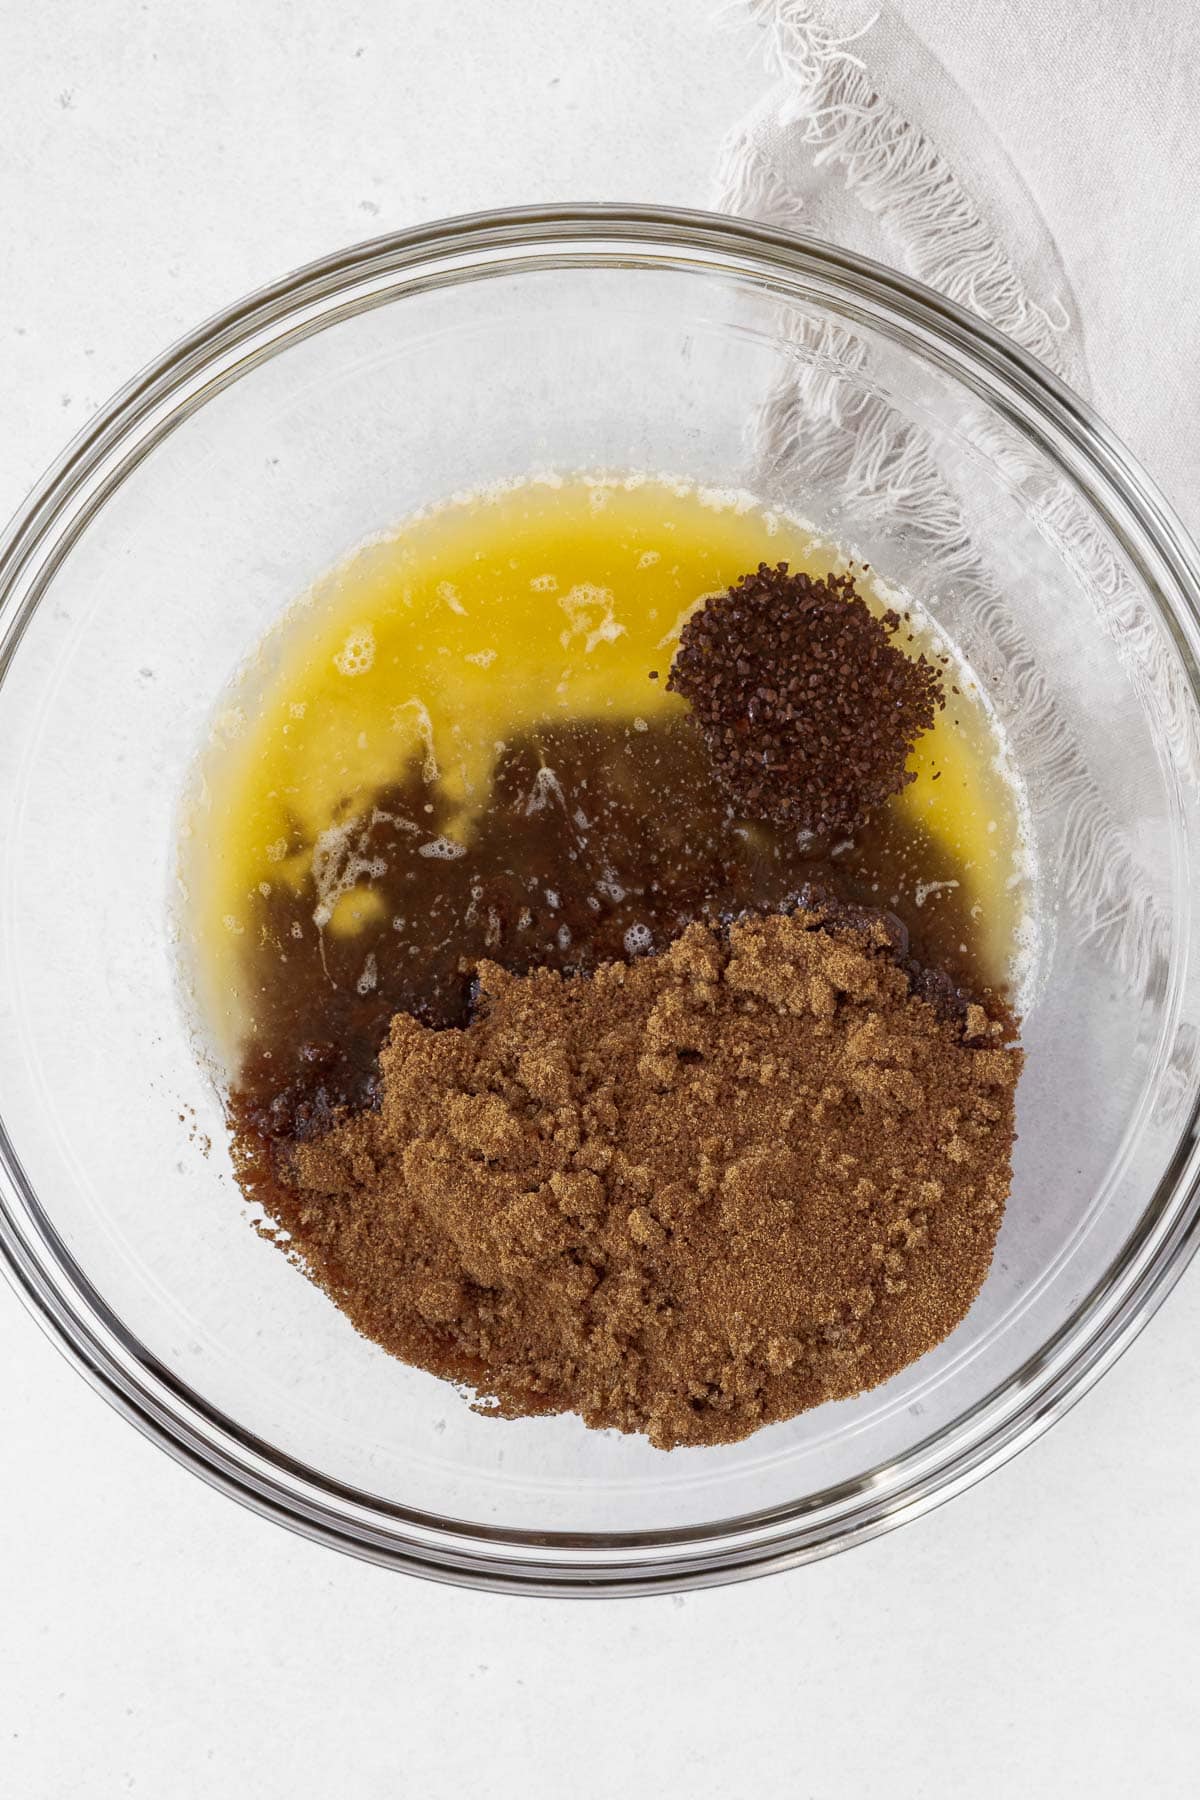 Melted butter, chocolate, sugar, and espresso powder in a glass mixing bowl.